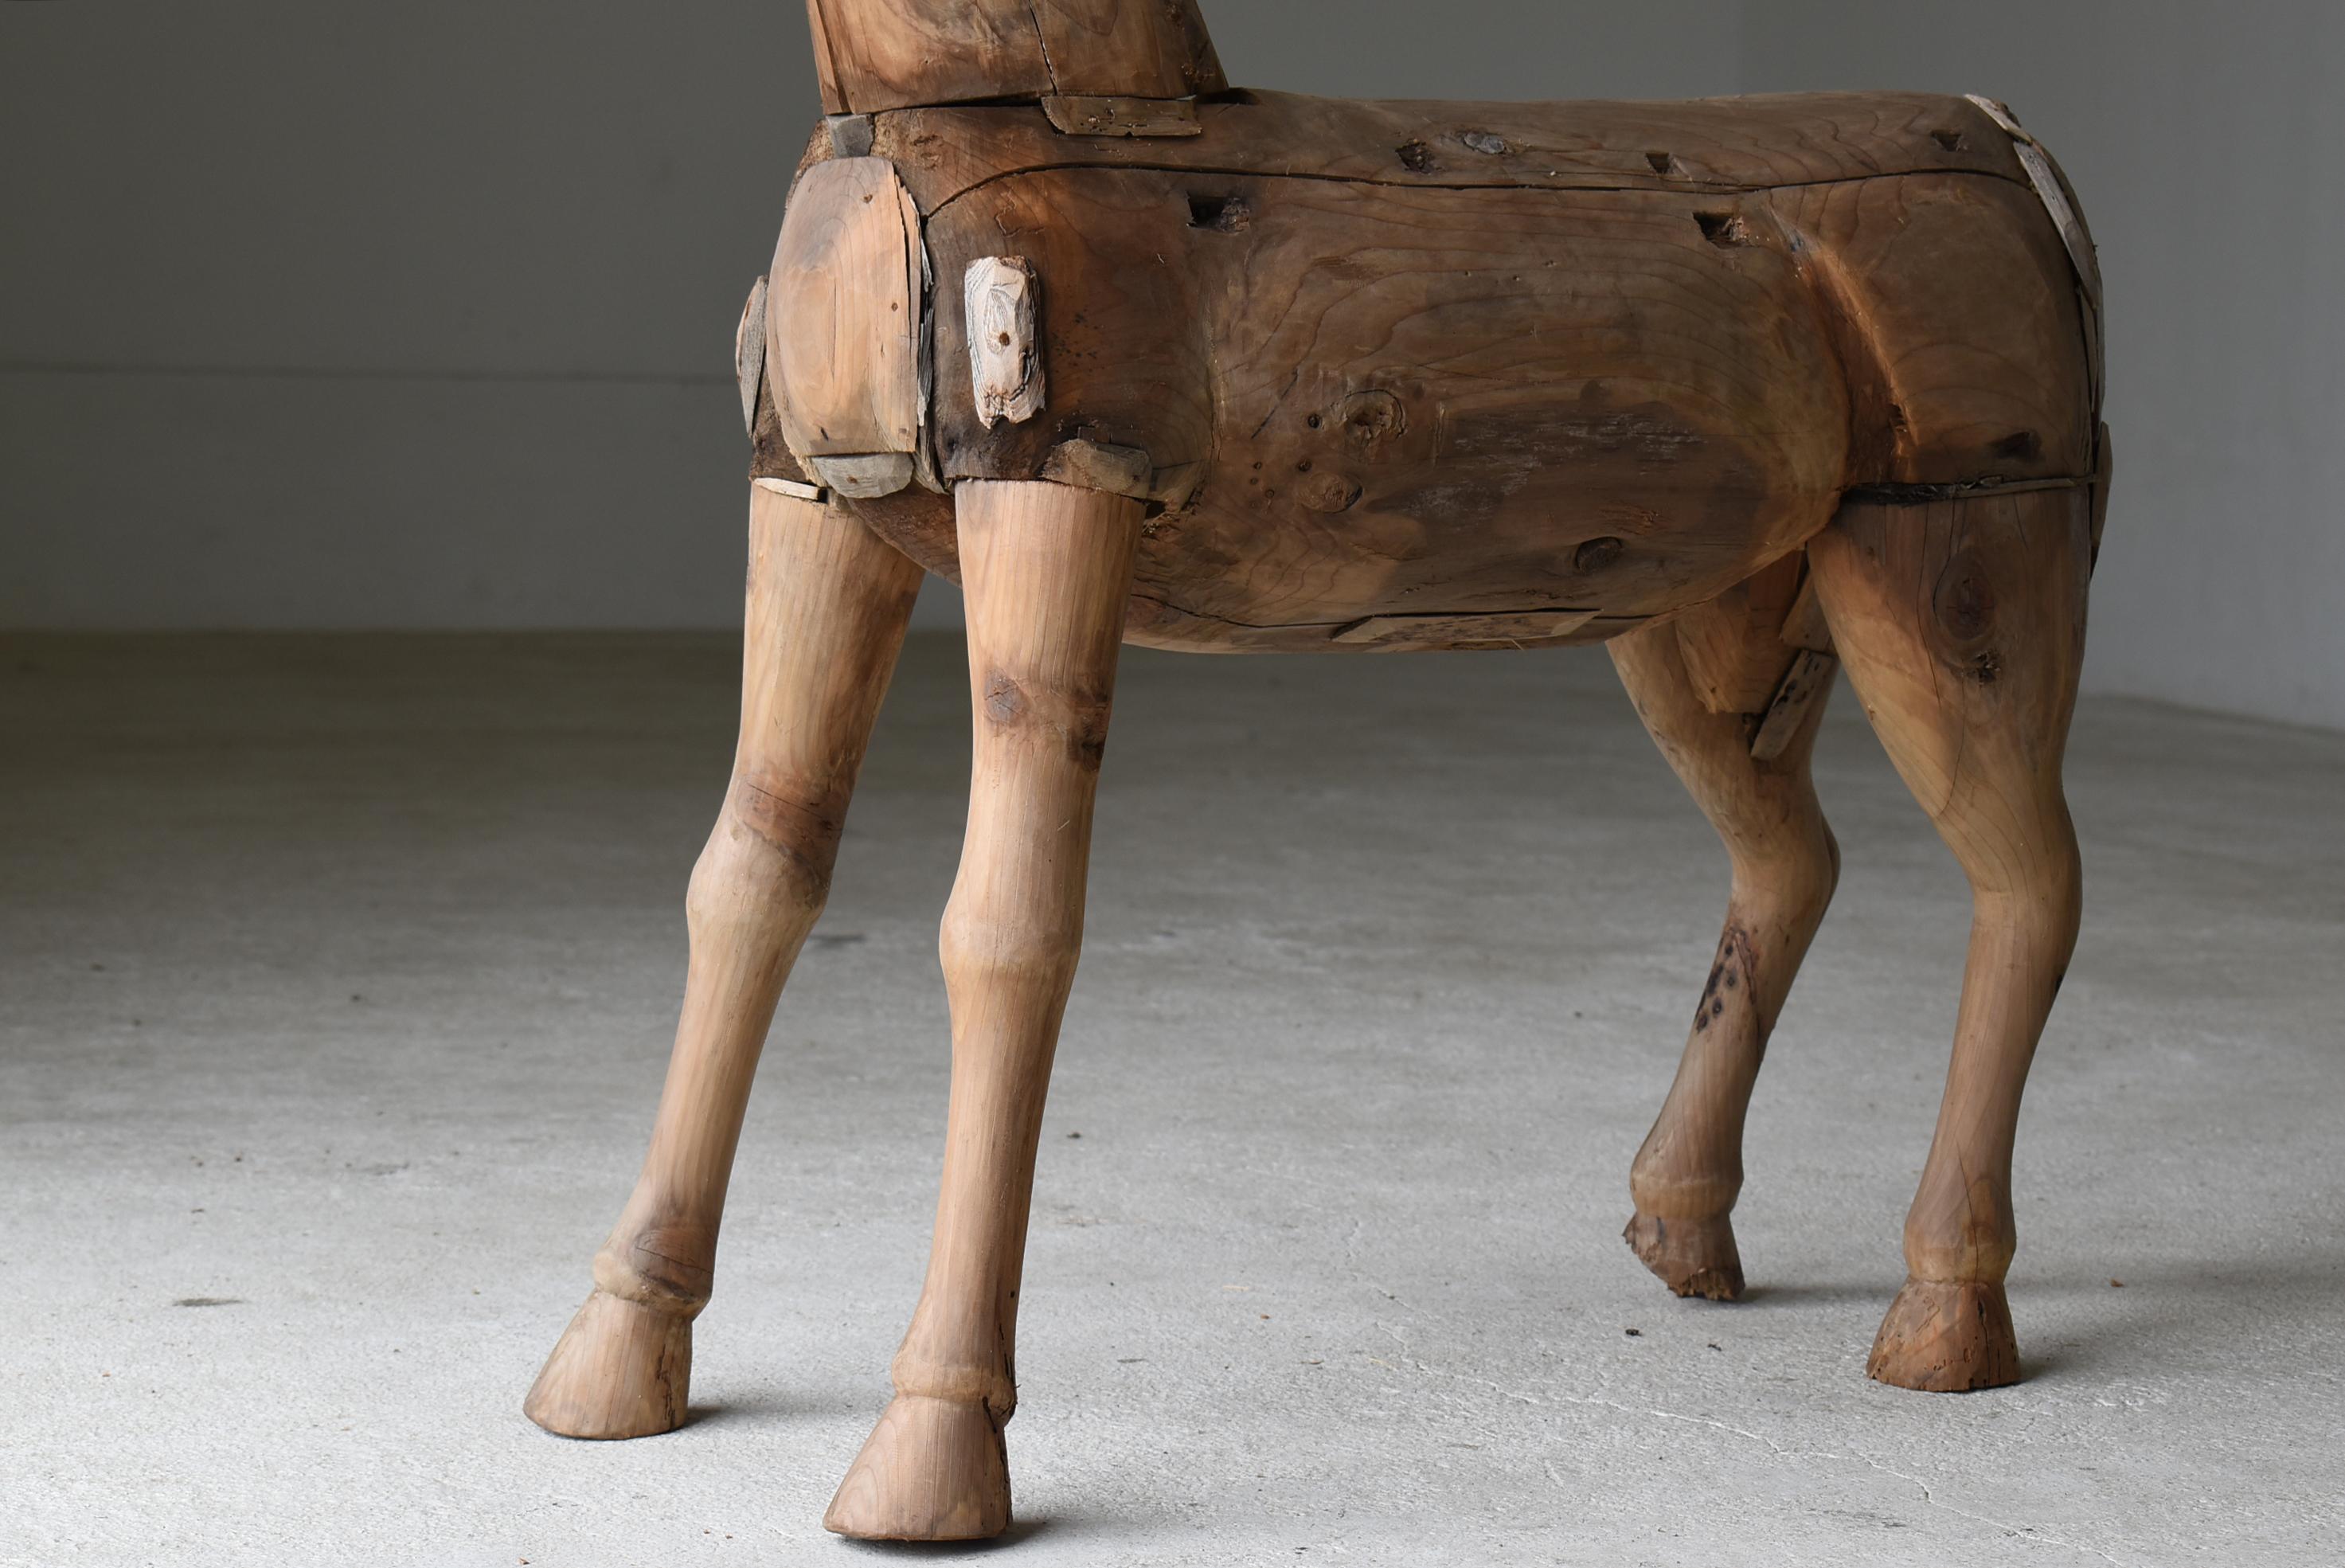 19th Century Japanese Antique Wood Carving Large Horse 1800s-1860s / Sculpture Wabisabi For Sale